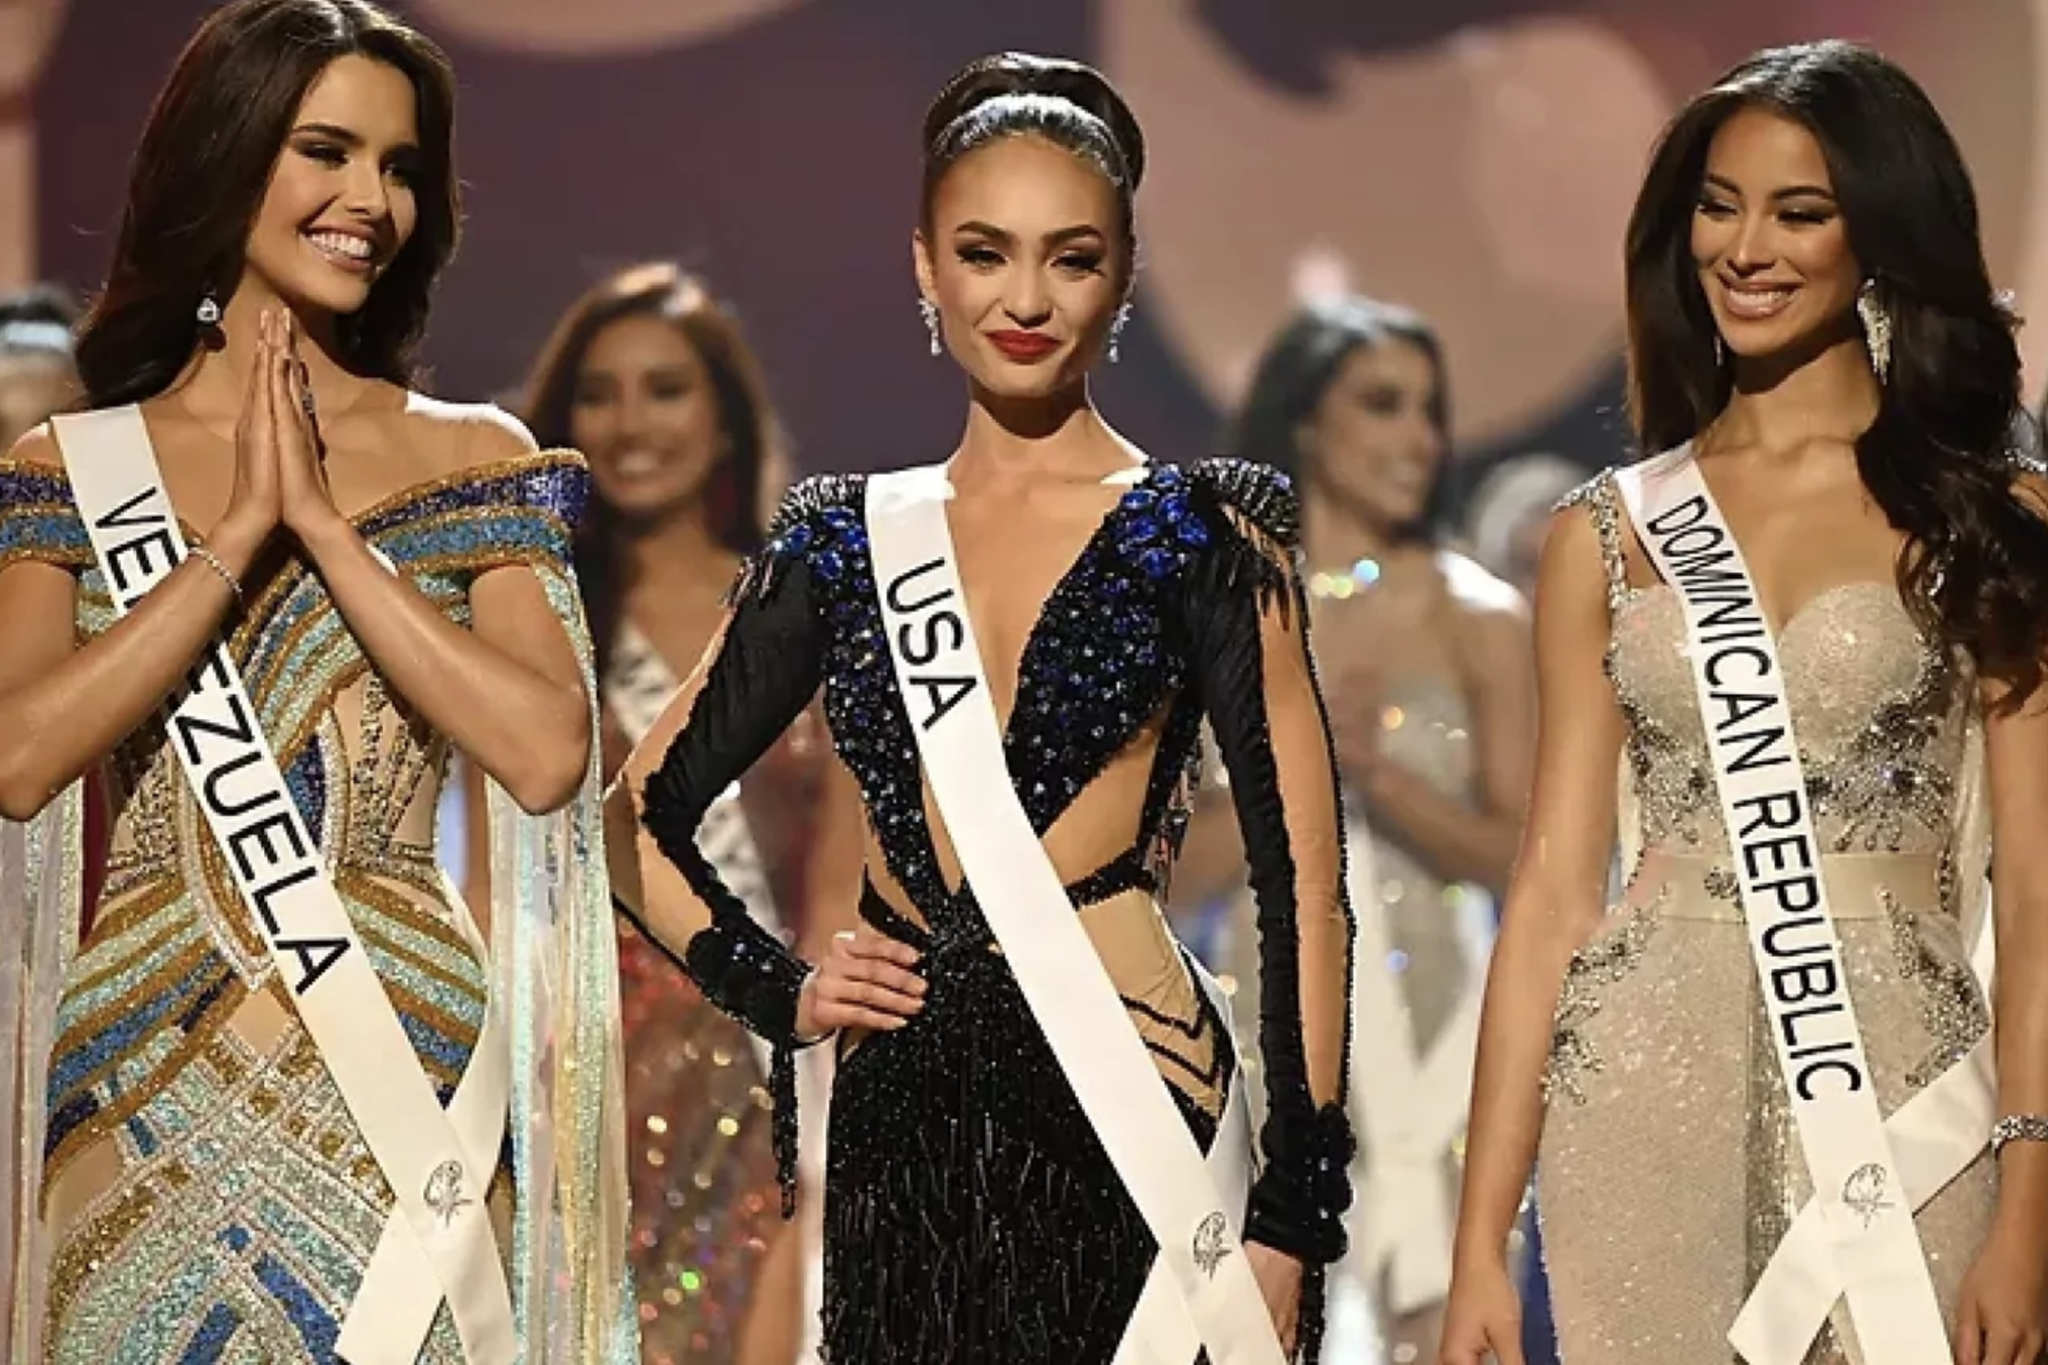 Who is the current owner of Miss Universe?